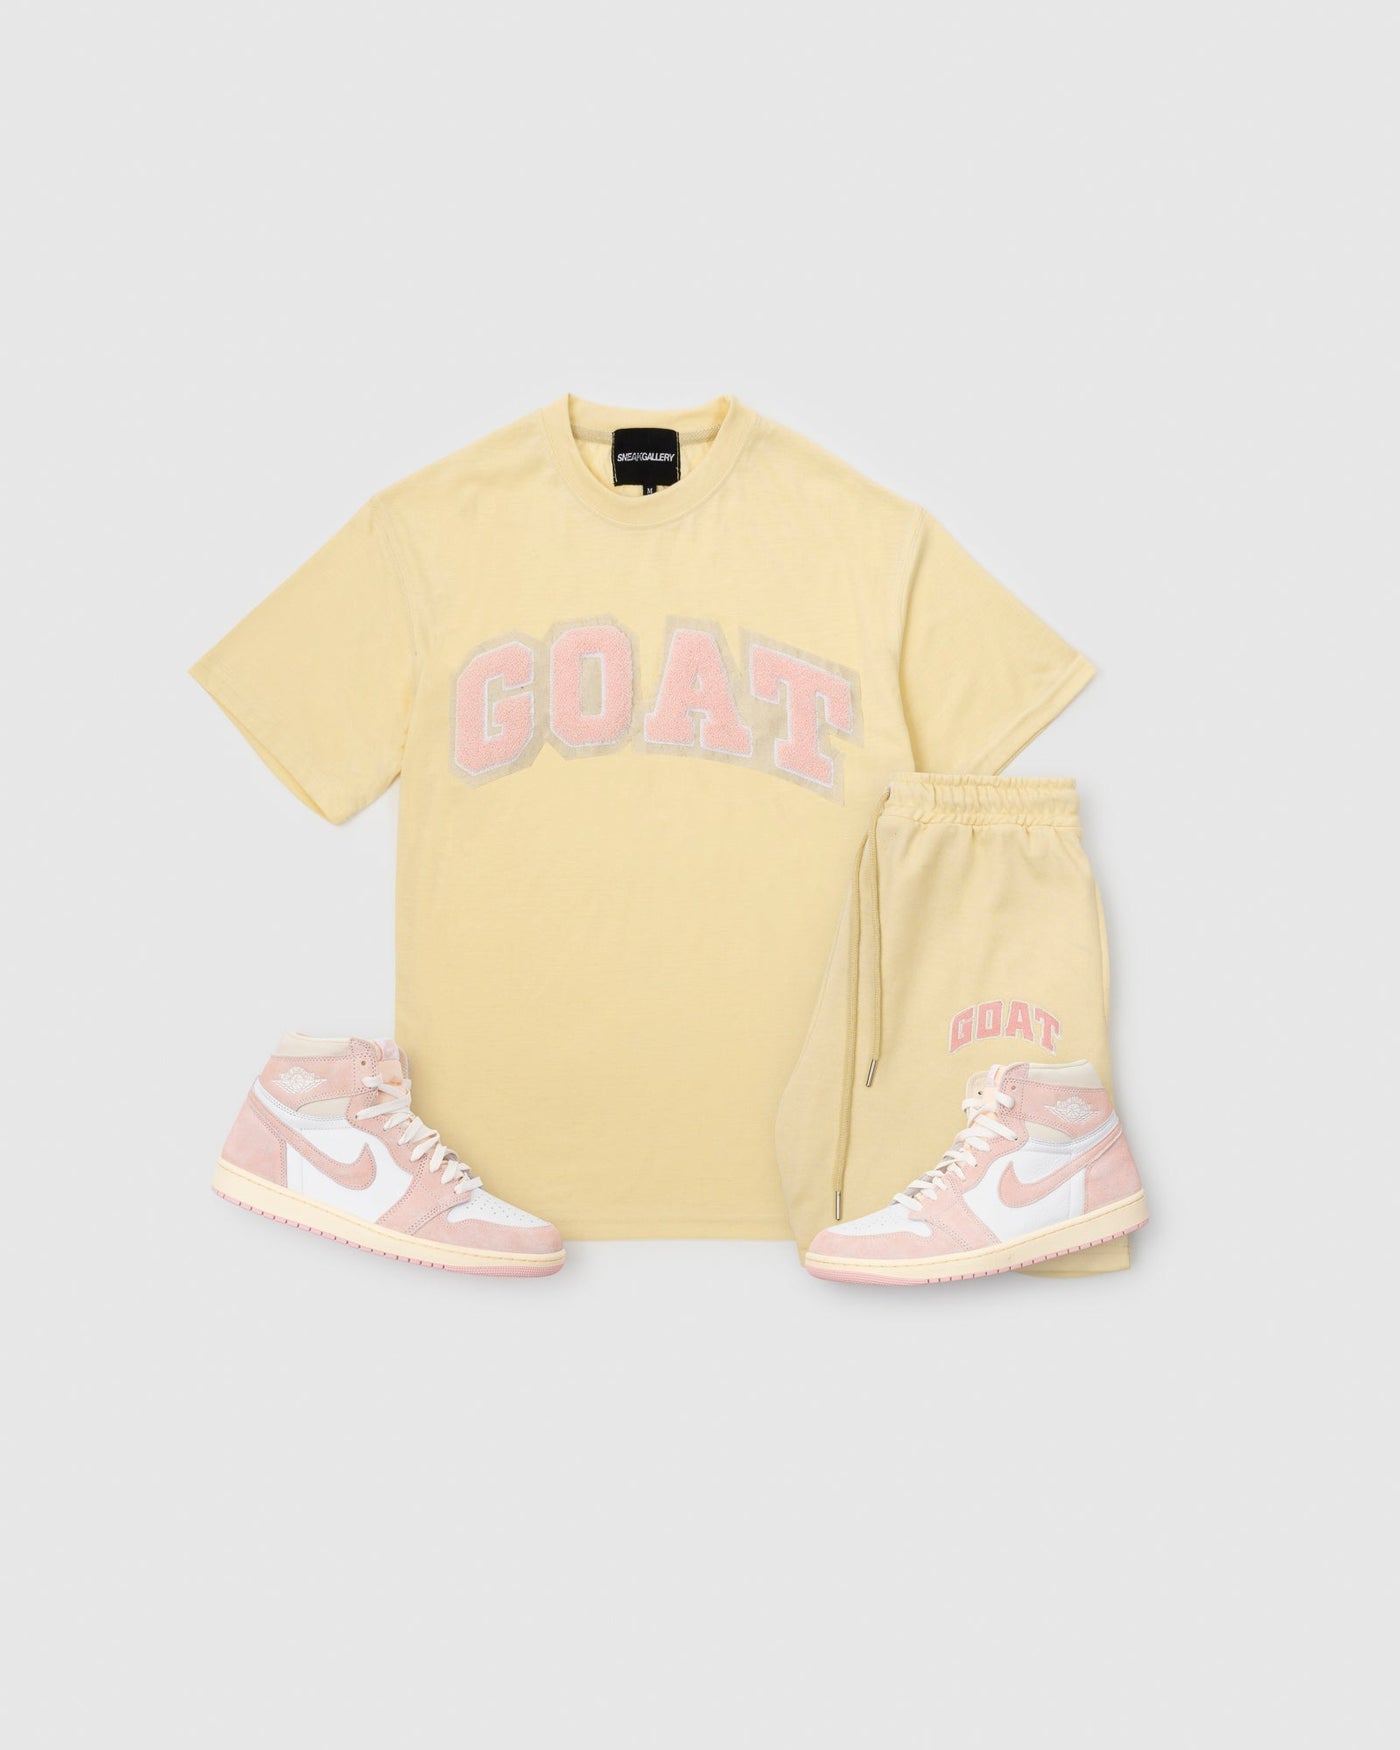 GOAT Chenille Tee and Shorts Set (Sail/Washed Pink)